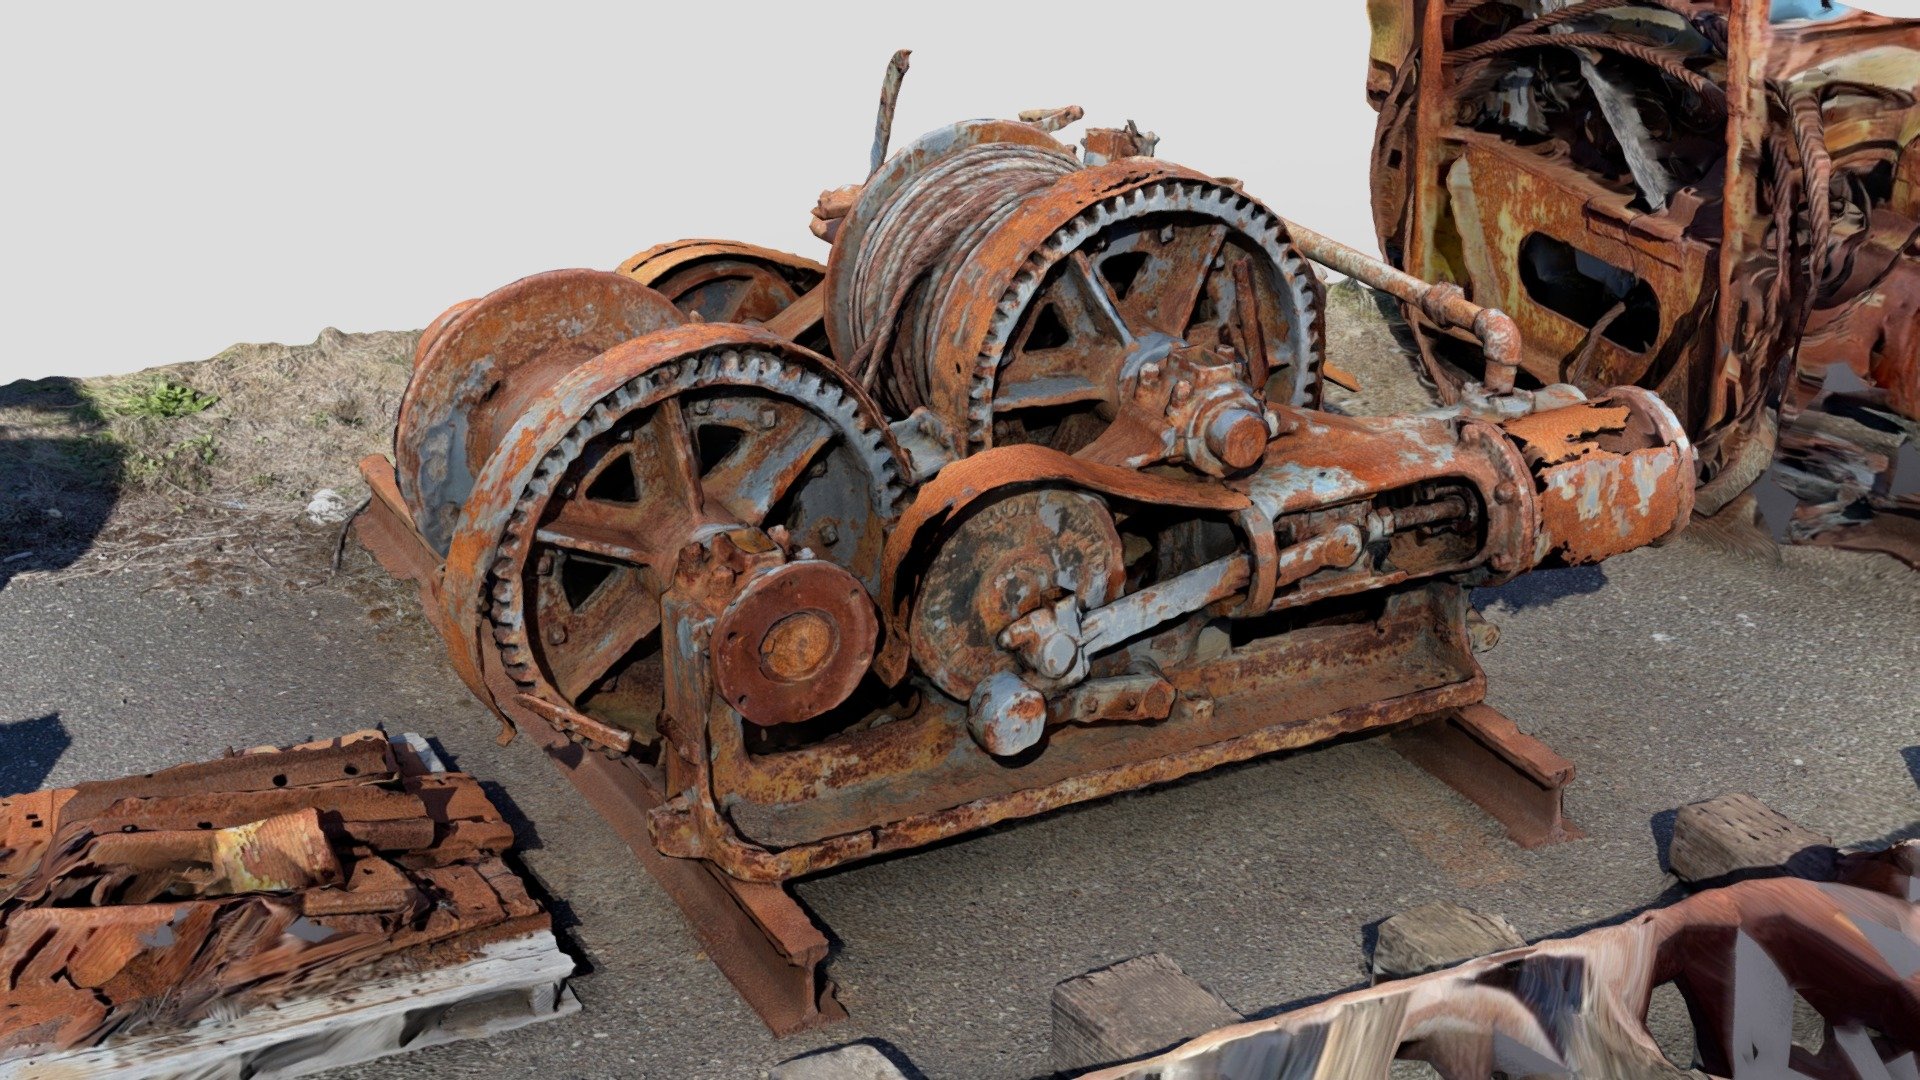 An old steam winch at the Timber Heritage Association shops complex and museum in Samoa, California. Created with Polycam on an iPhone 12 Pro Max 3d model